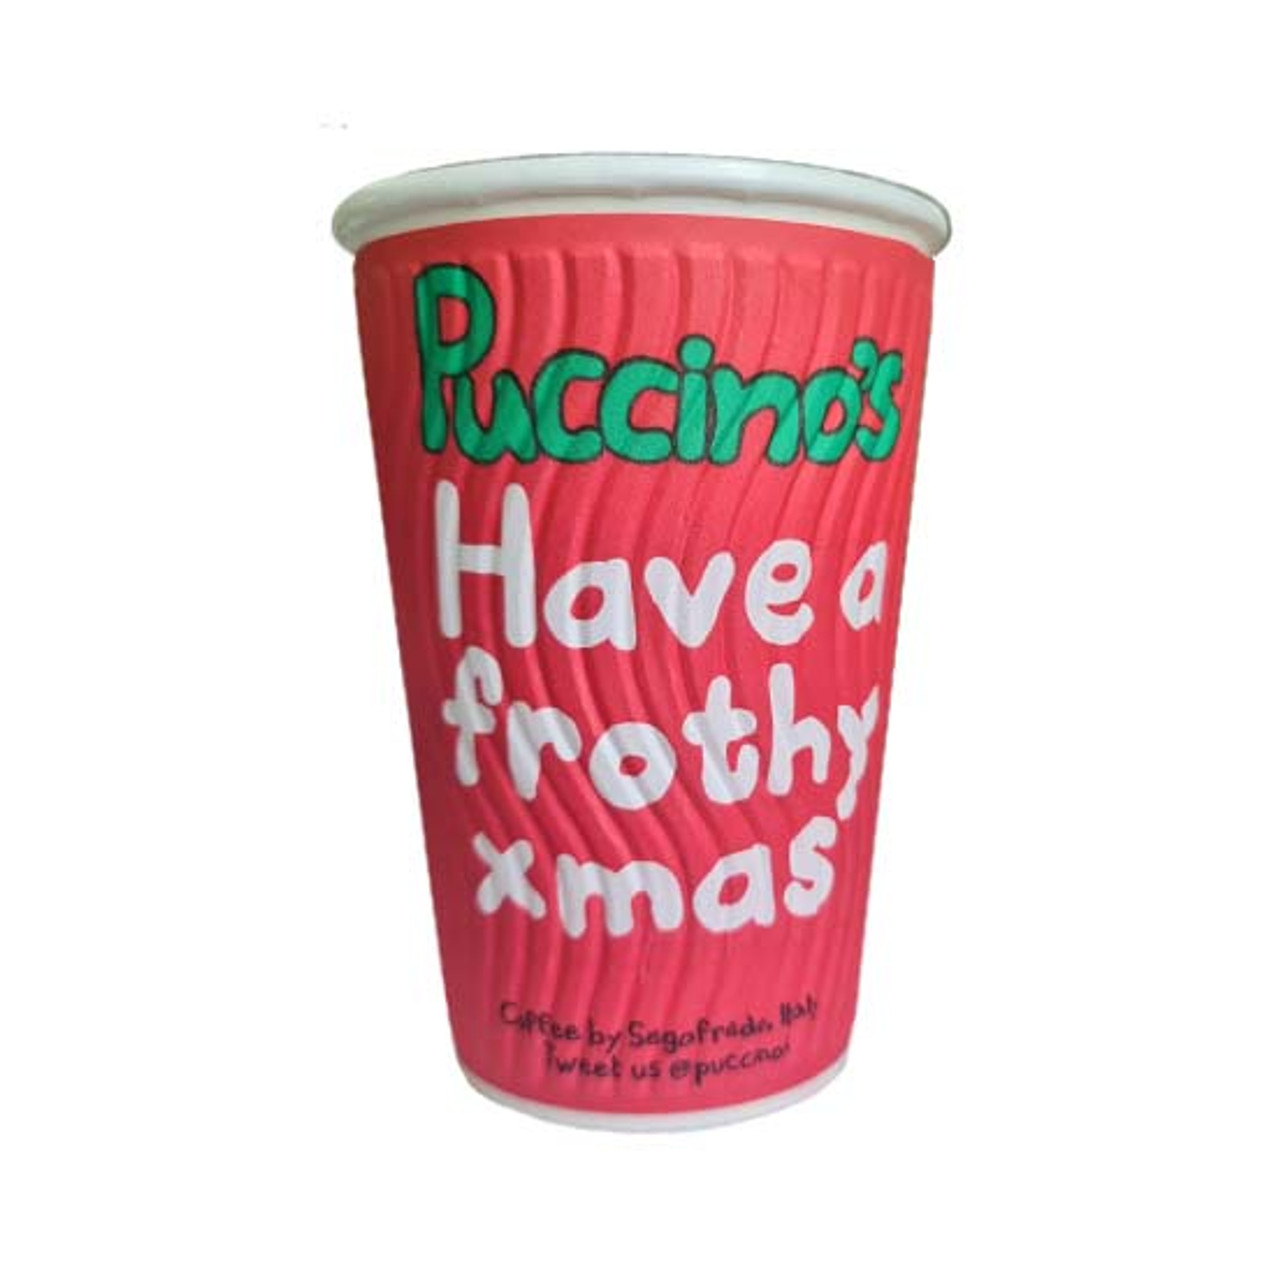 16oz Red ripple cardboard misprint cup - 'Have a frothy xmas'